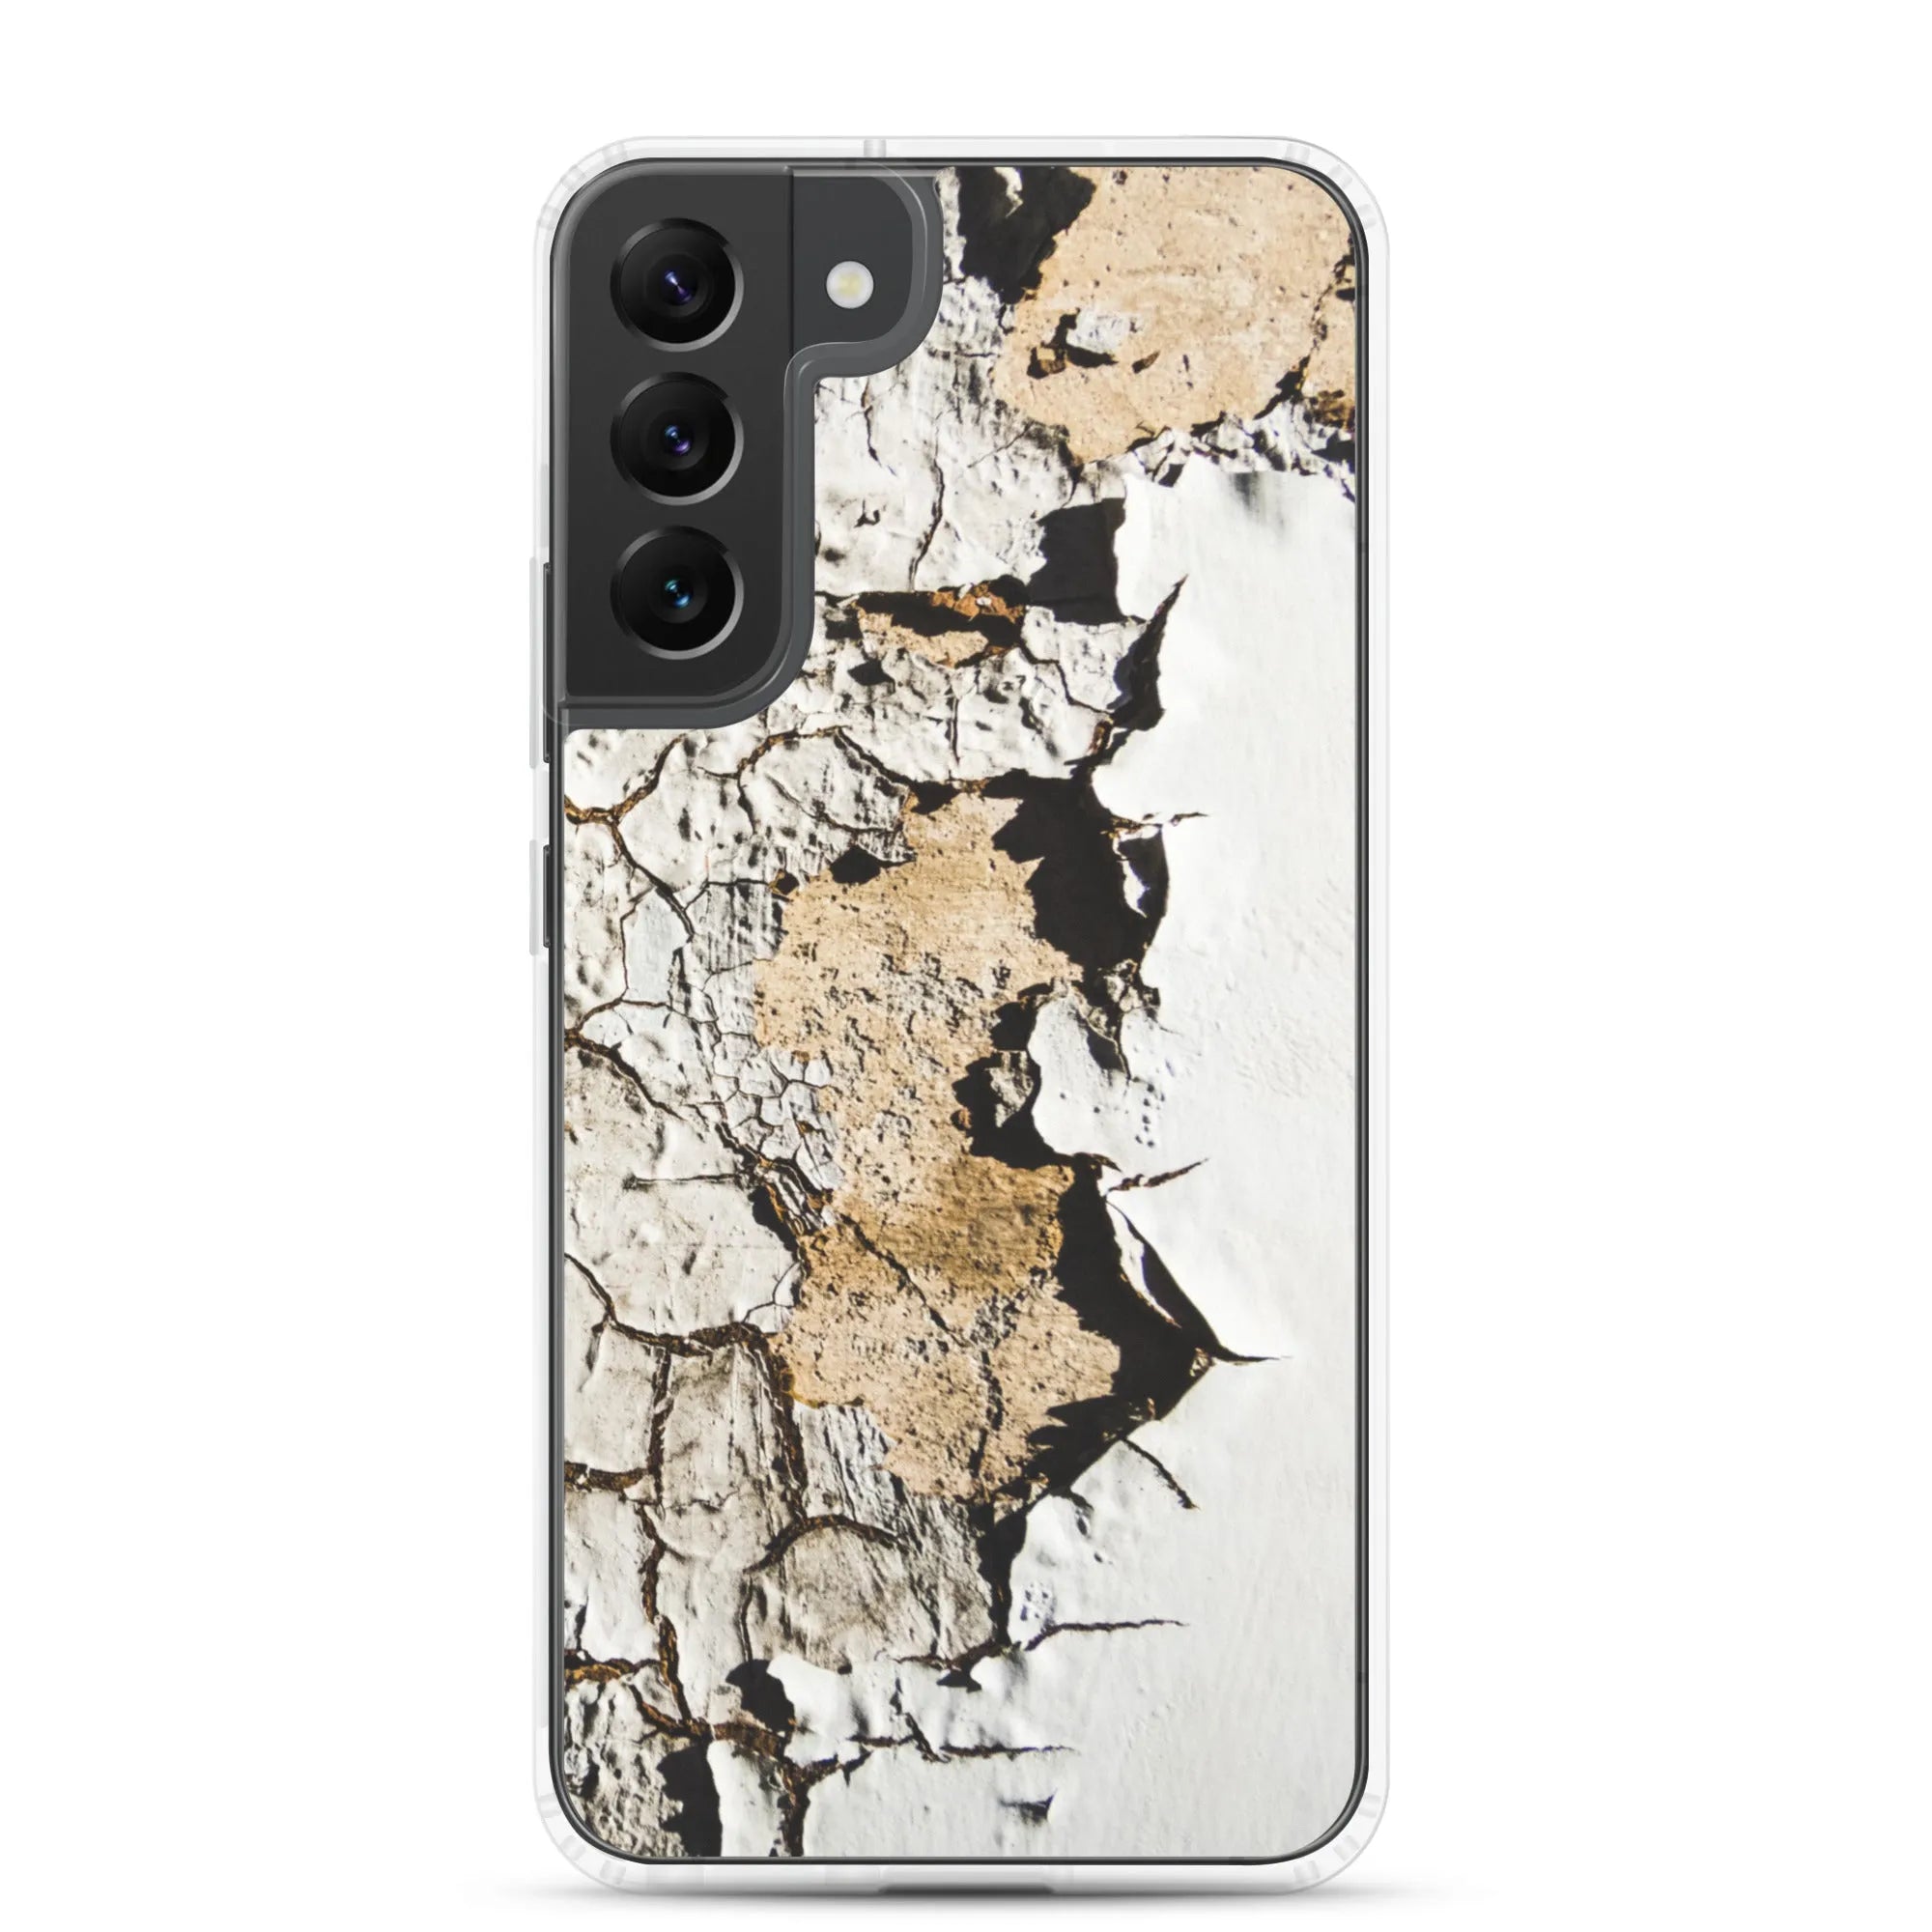 Cracked It Samsung Galaxy Case - Samsung Galaxy S22 Plus - Mobile Phone Cases - Aesthetic Art